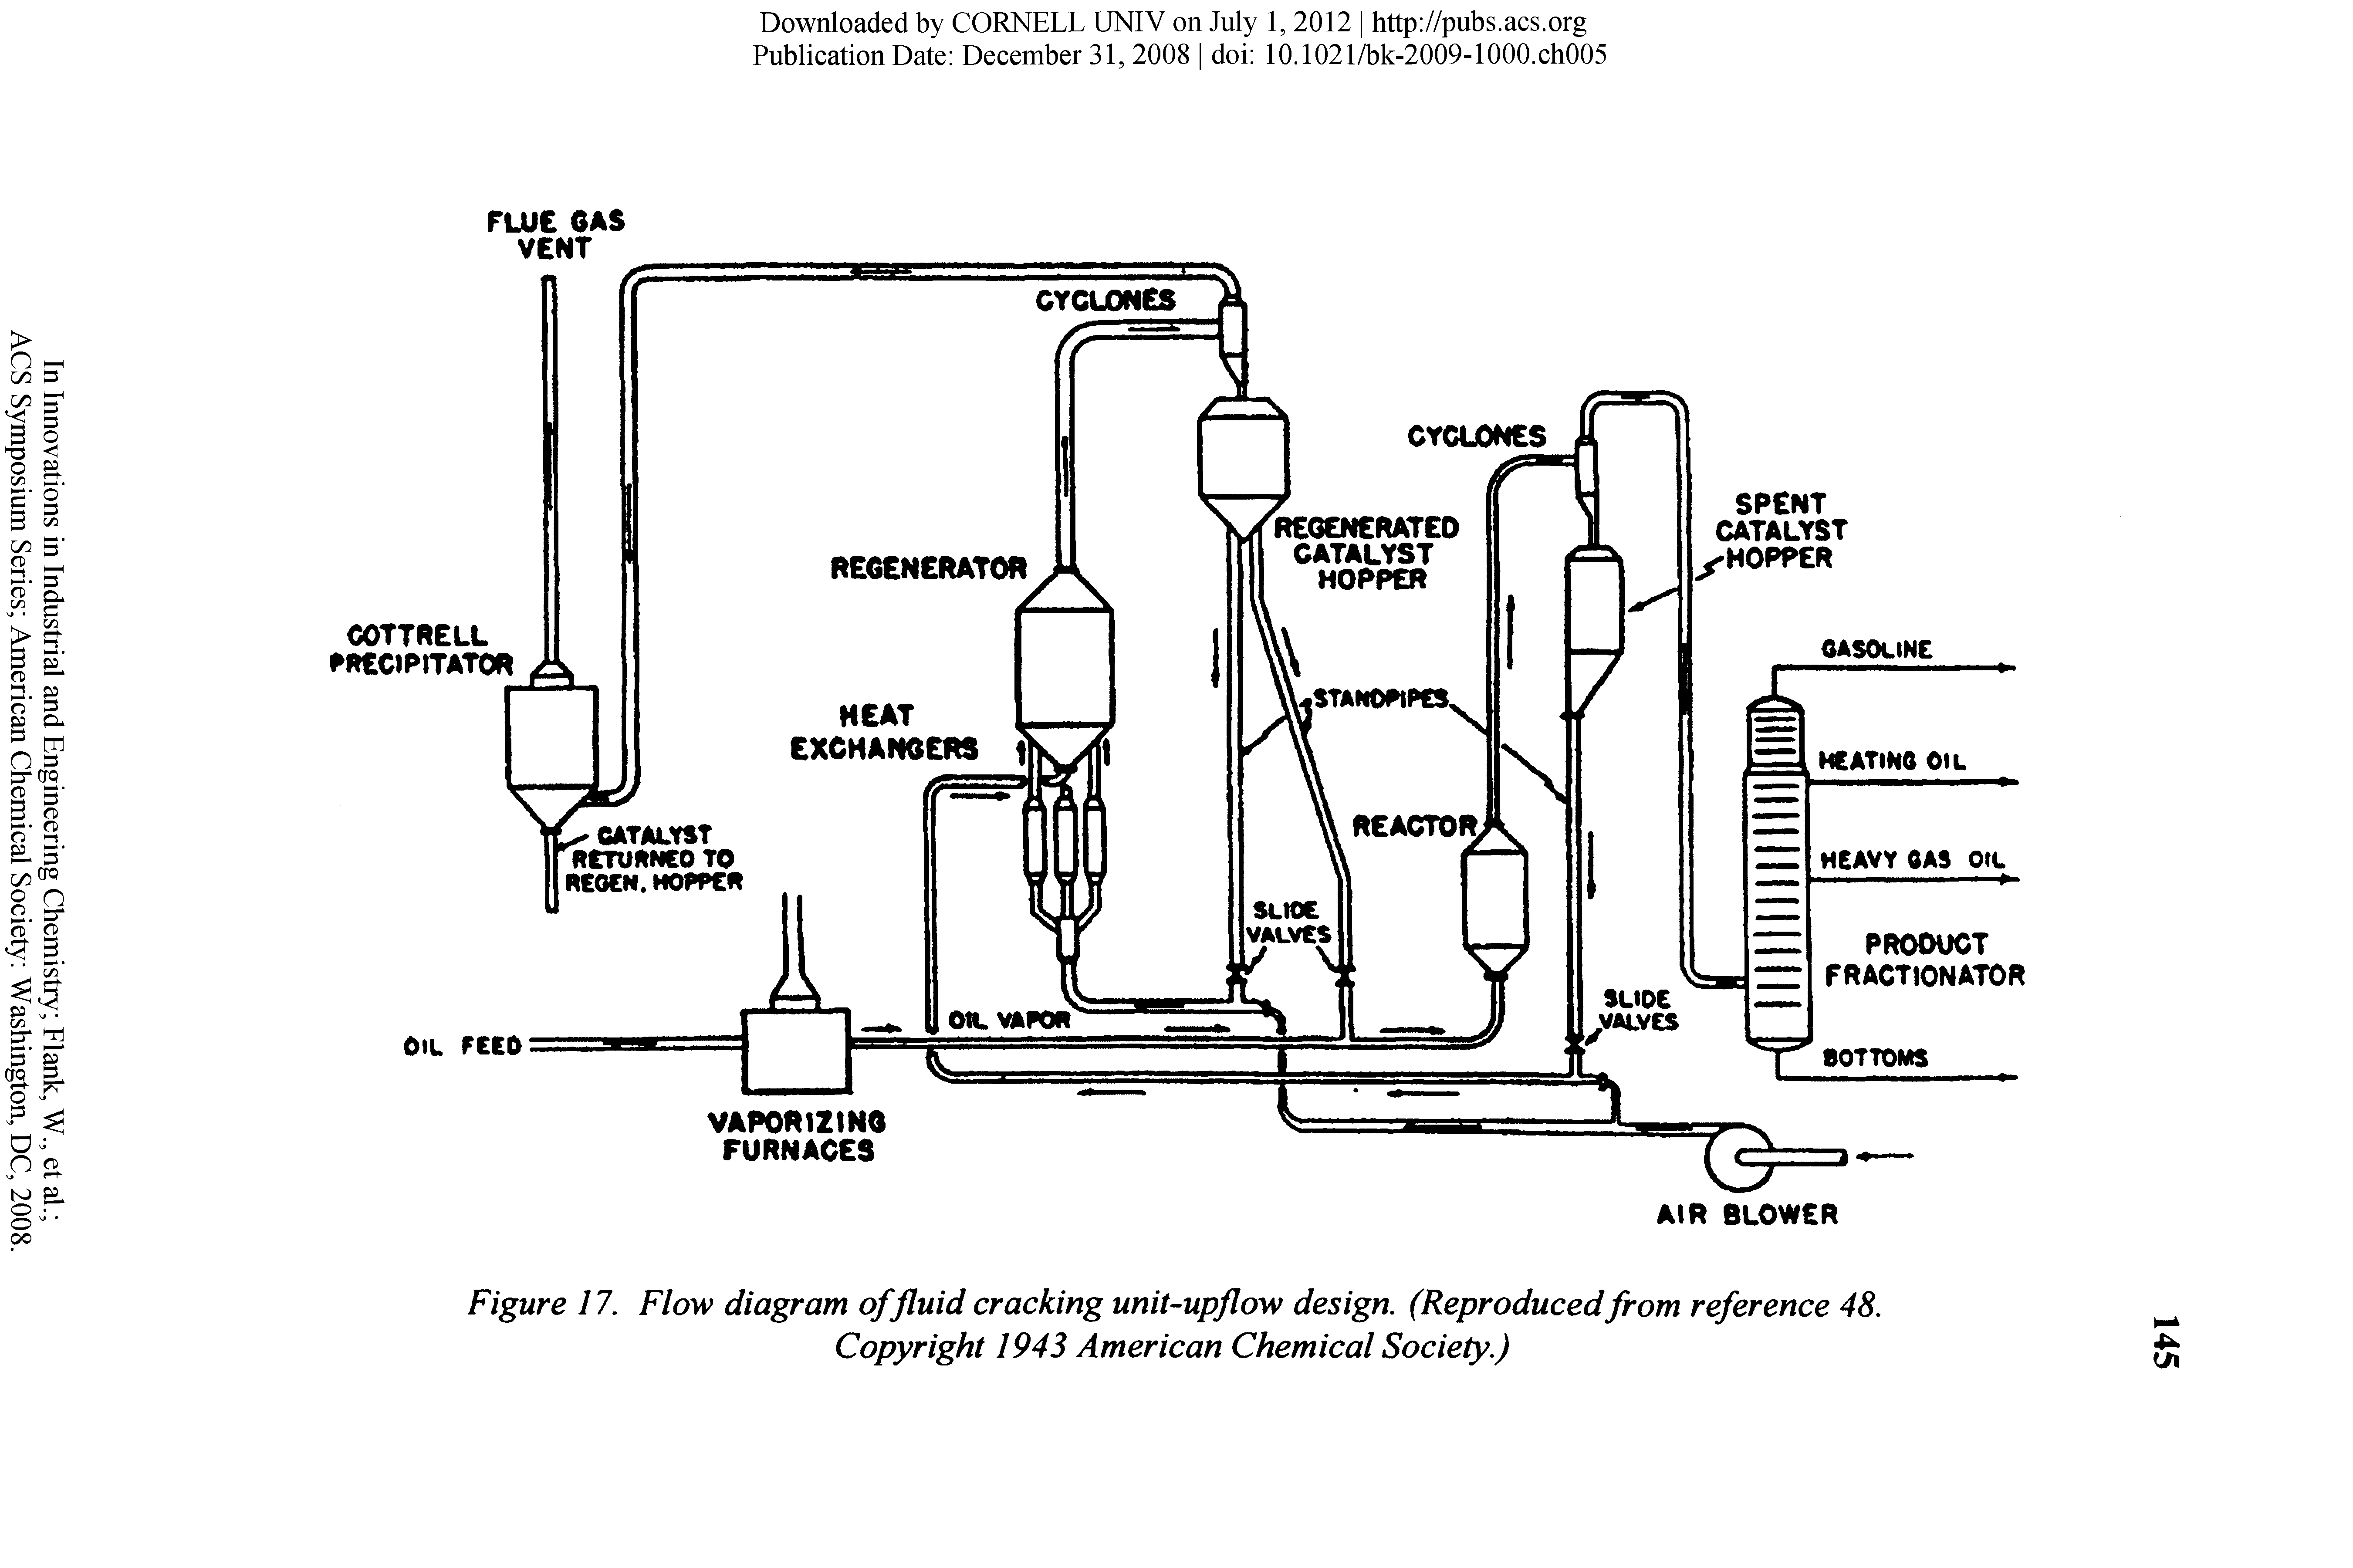 Figure 17. Flow diagram of fluid cracking unit-upflow design. (Reproduced from reference 48. Copyright 1943 American Chemical Society.)...